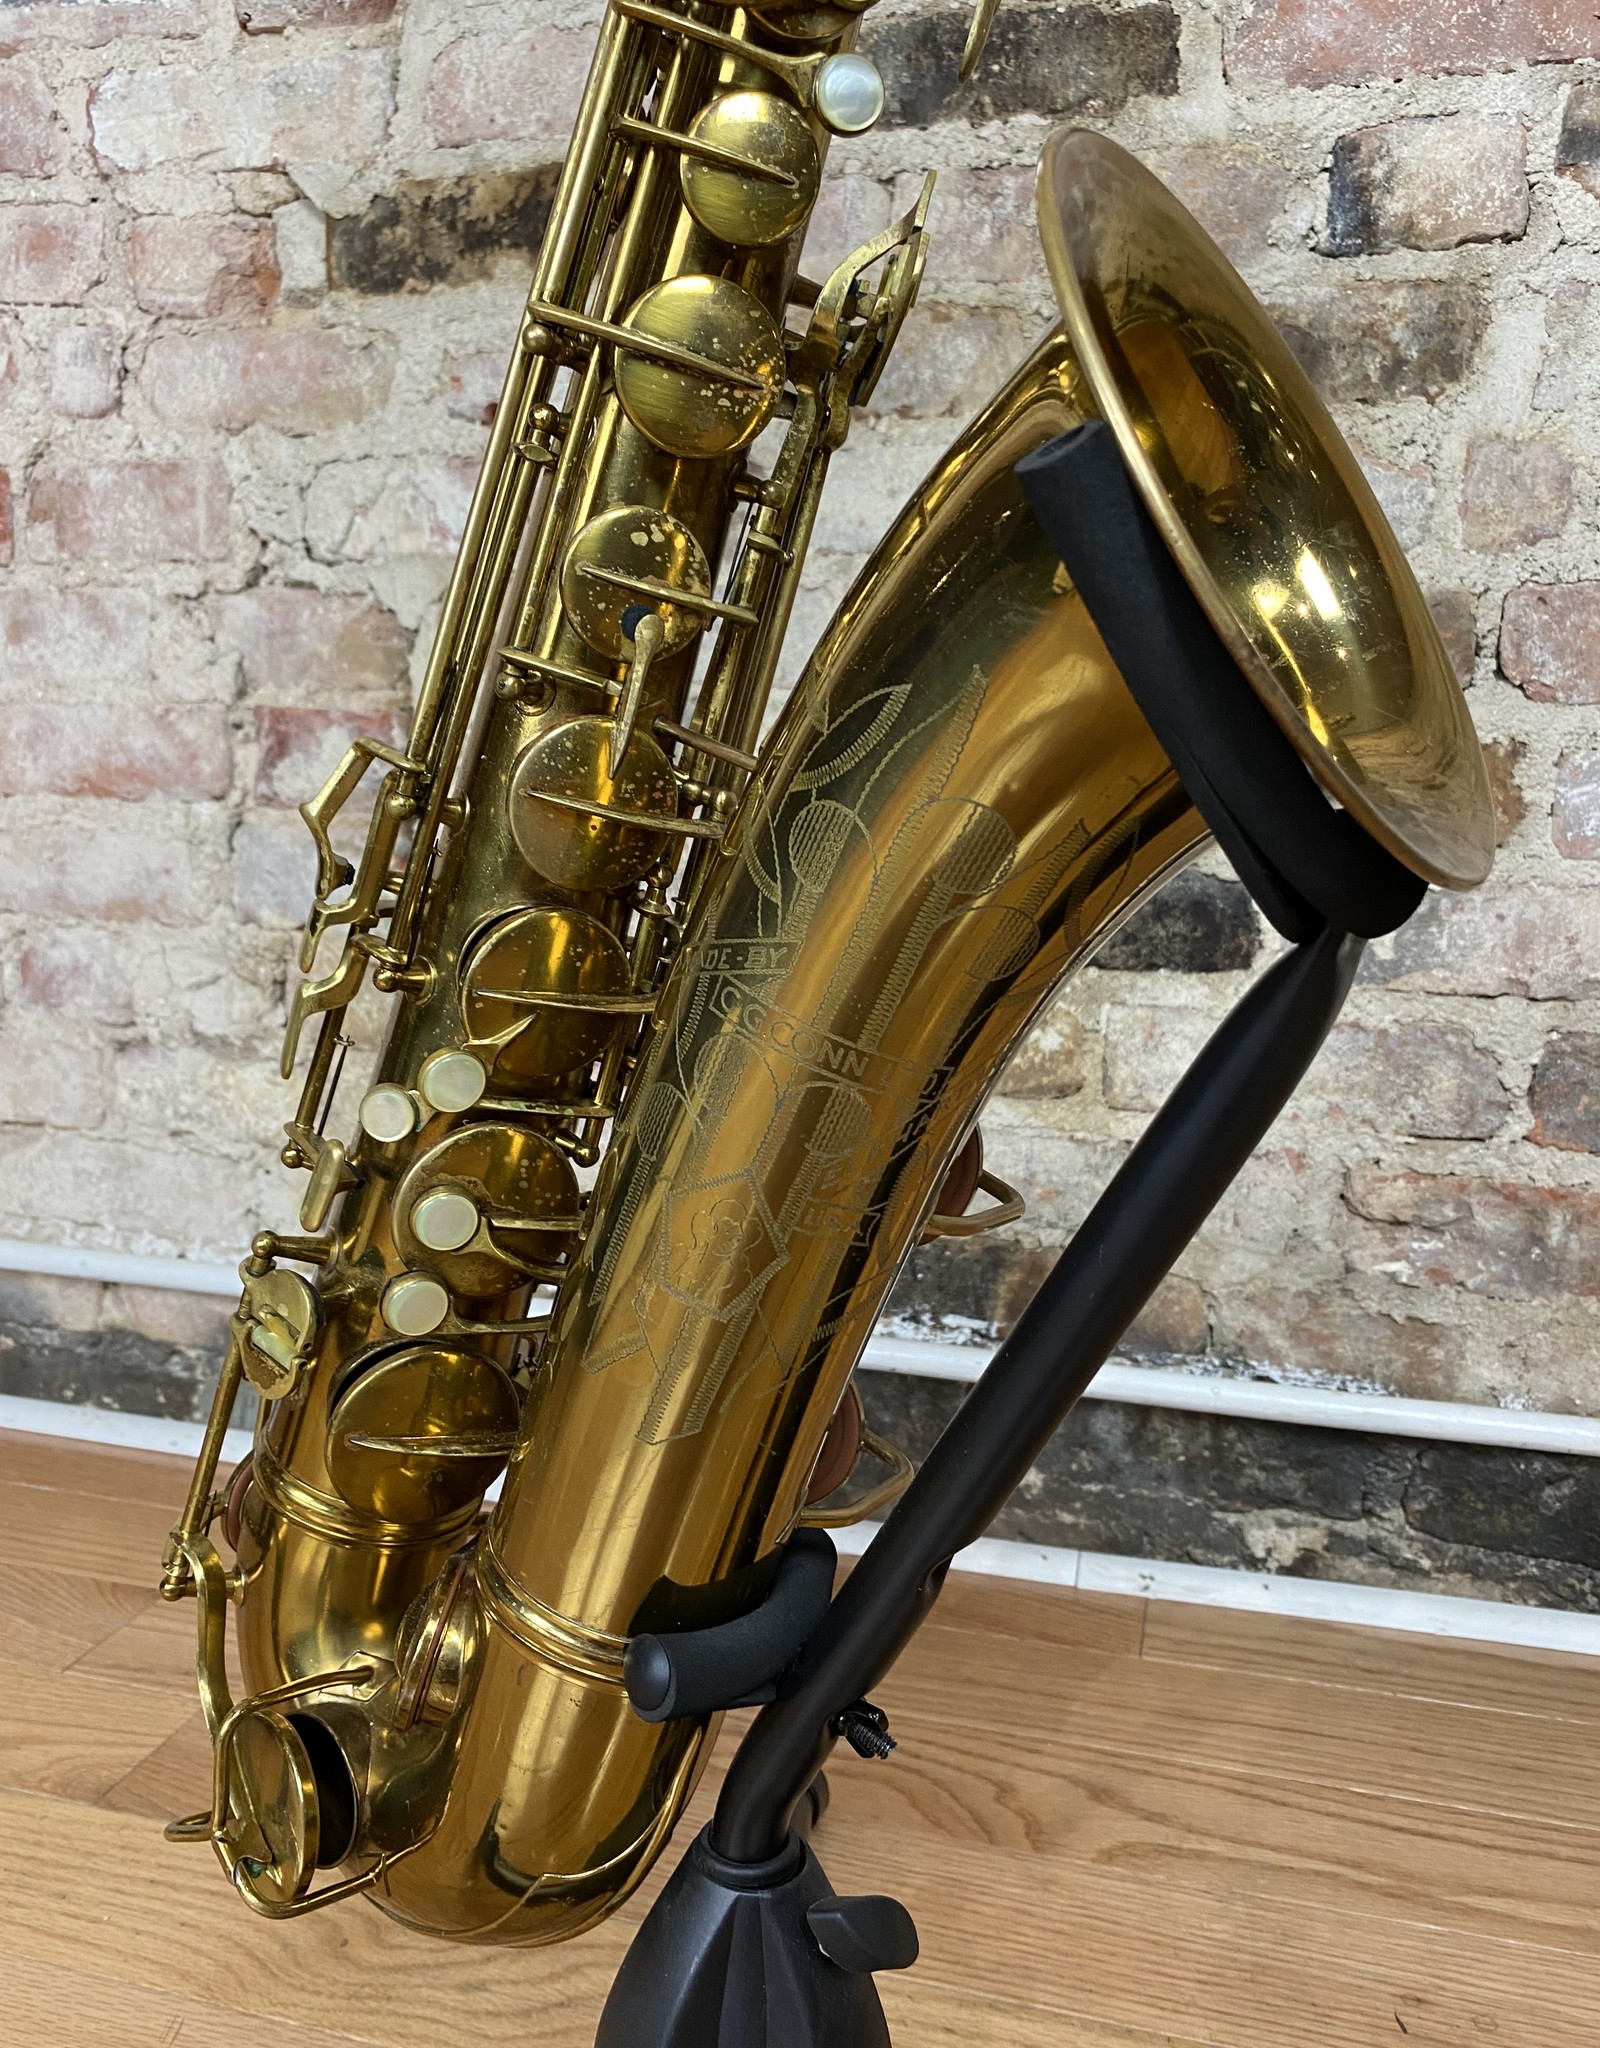 conn 10M 1939 Conn 10M Naked Lady Tenor Saxophone with gorgeous original lacquer and fresh overhaul